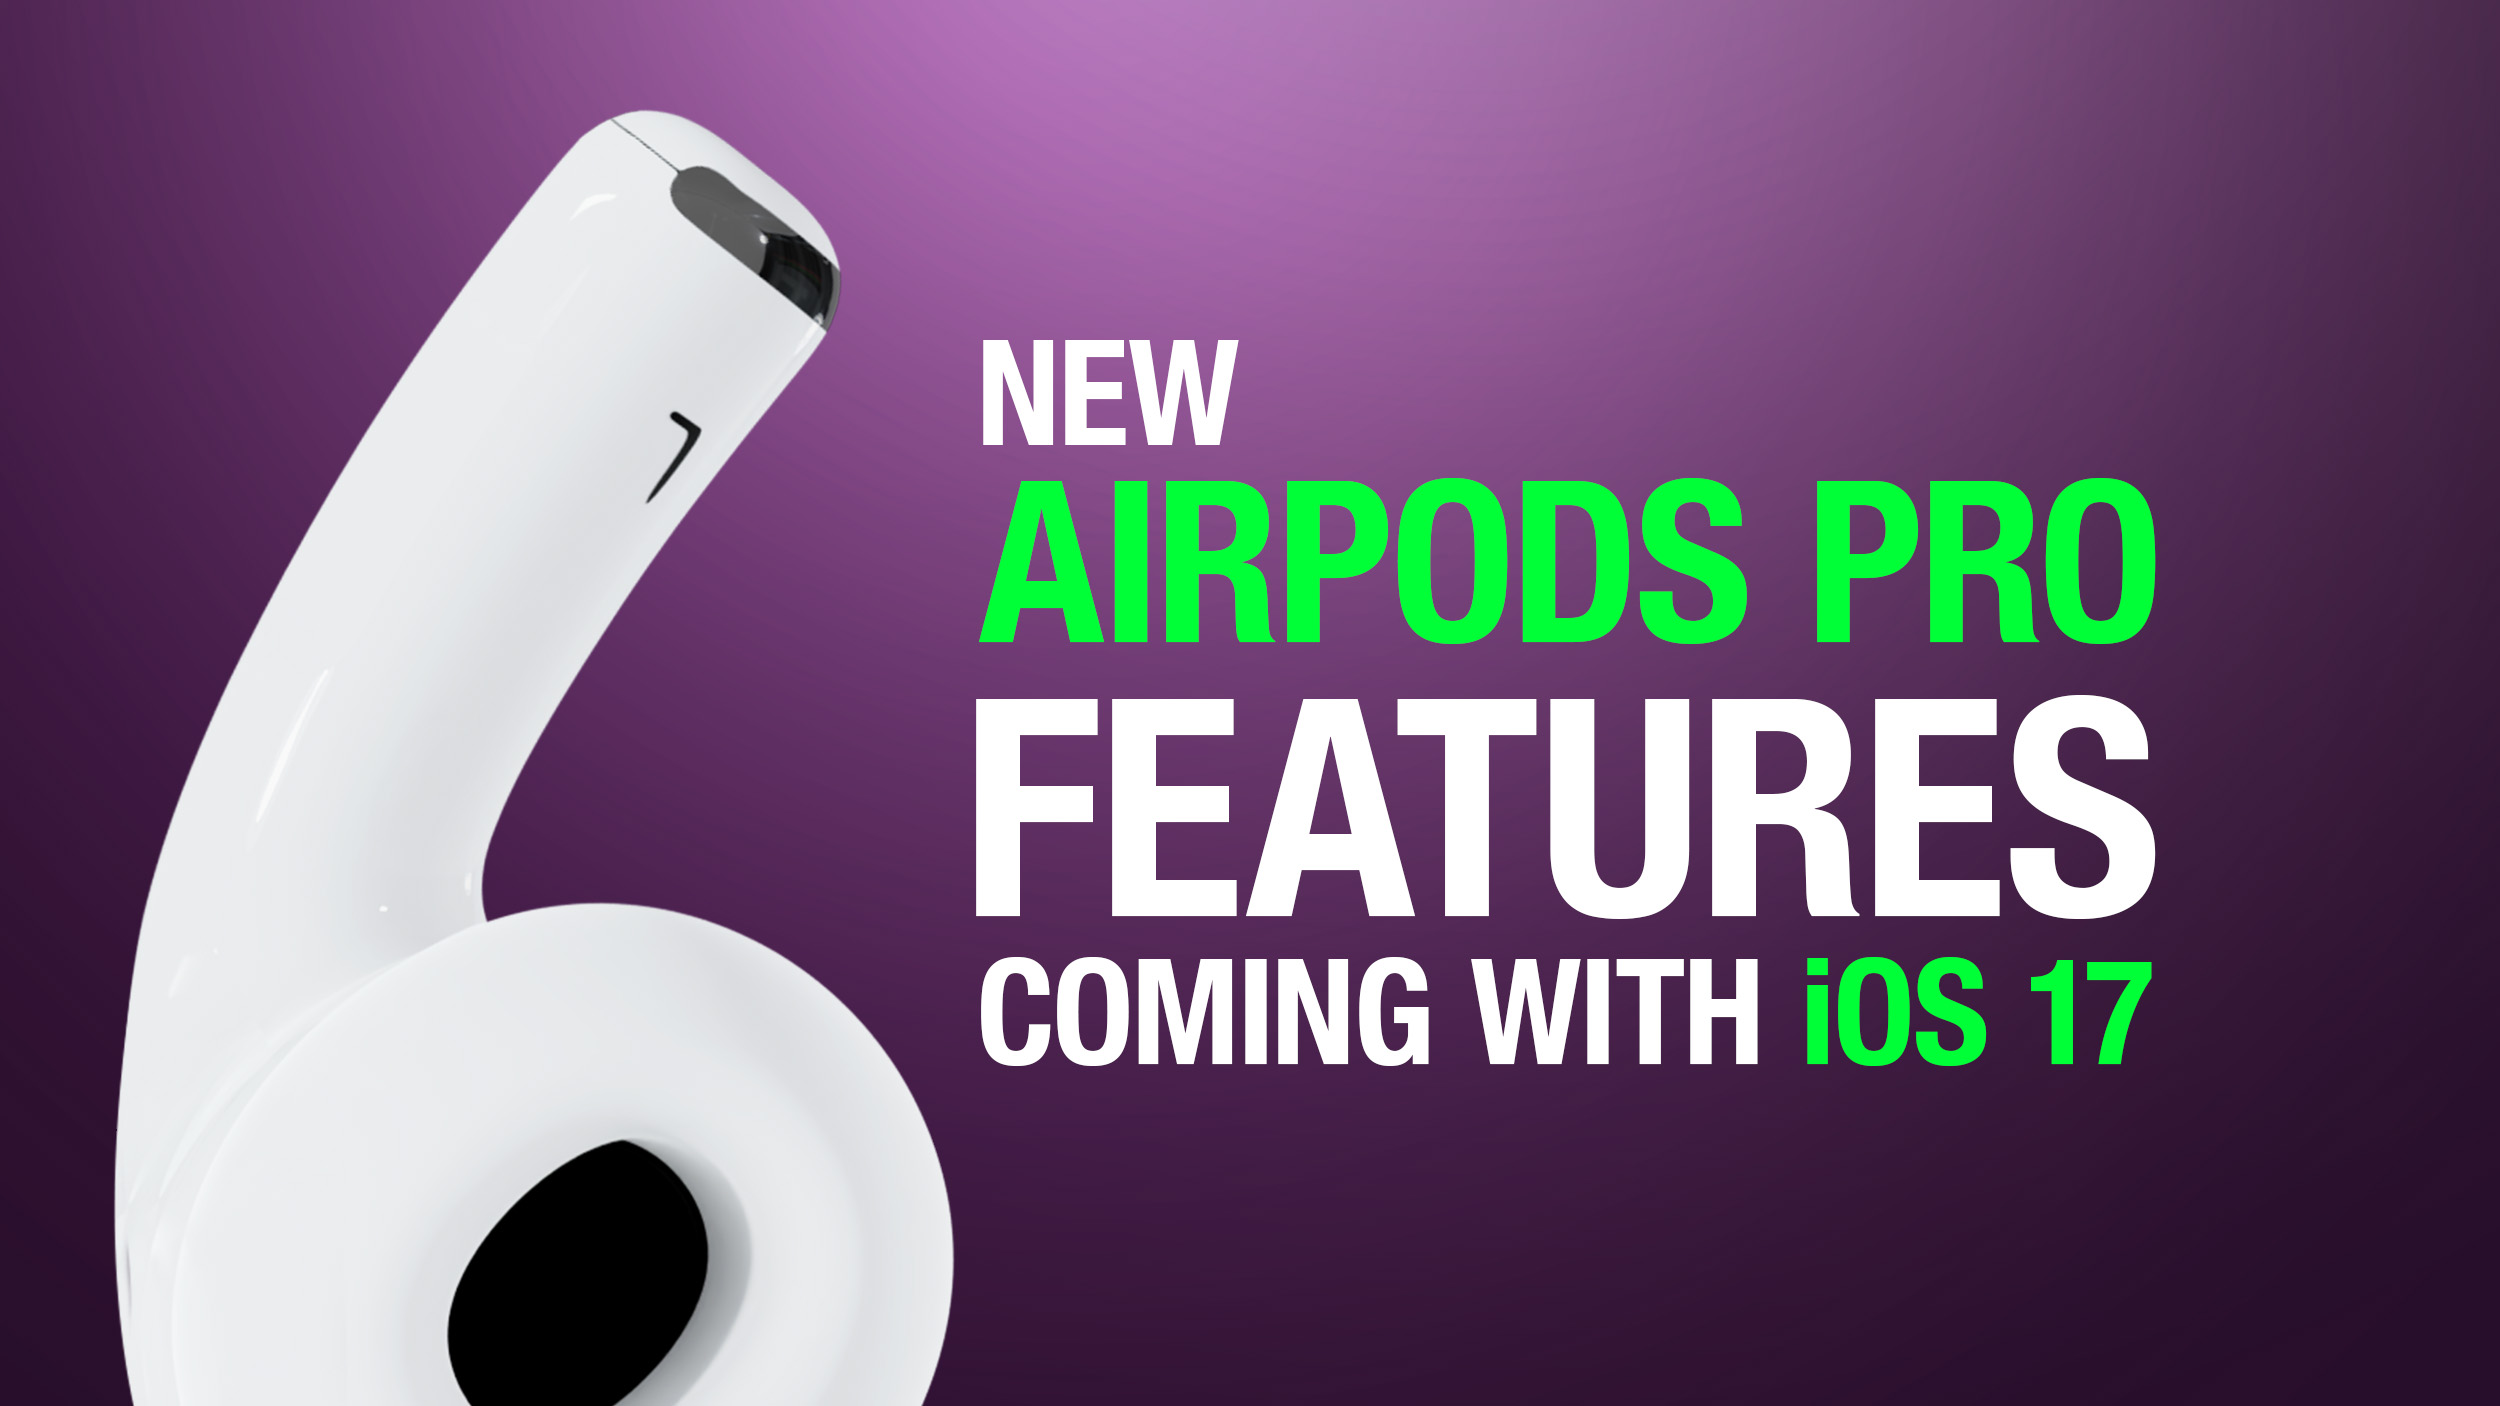 6 New AirPods Pro Features Coming in iOS 17